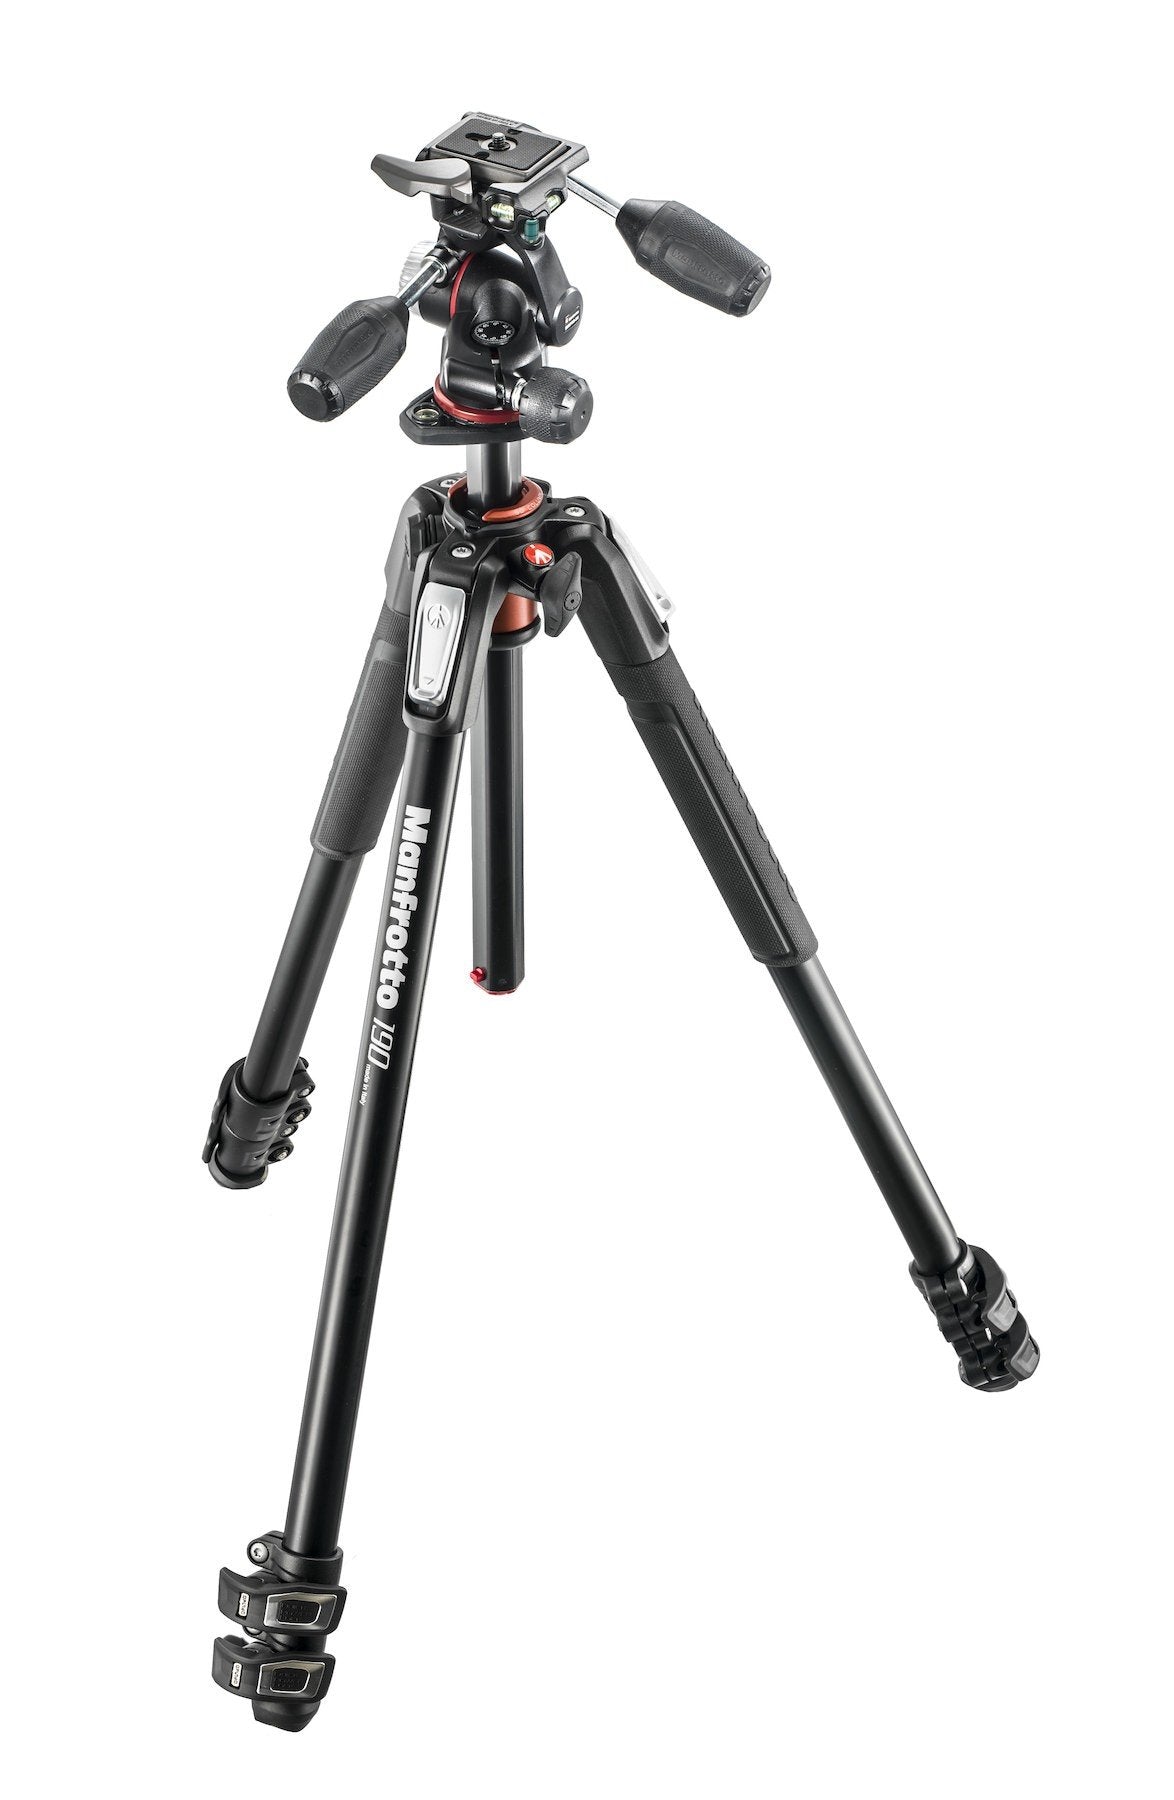 Manfrotto MK190XPRO3-3W New 190 Alu 3-Section Kit with XPRO 3-Way Head Manfrotto Photo Tripod Kit